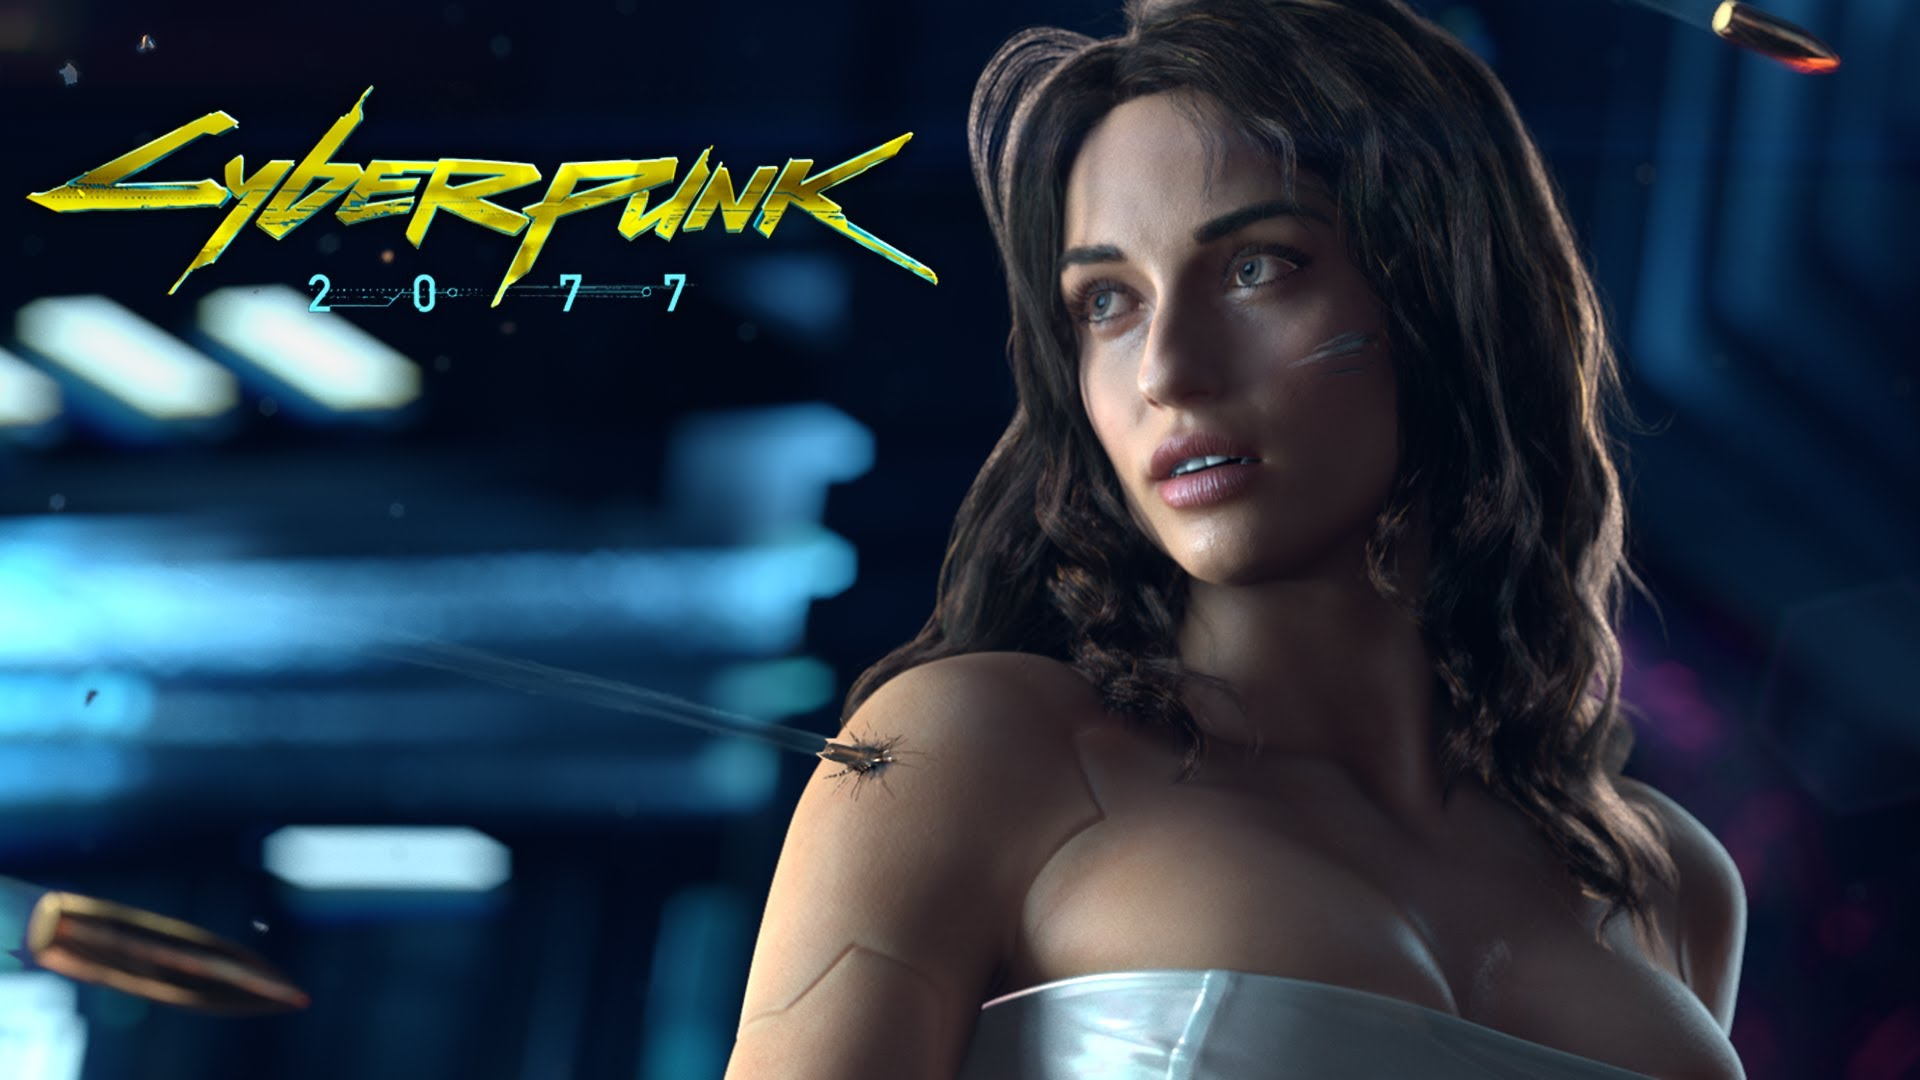 Cyberpunk 2077 One of The Best Gaming Computer Game Trailers at E3 2018 